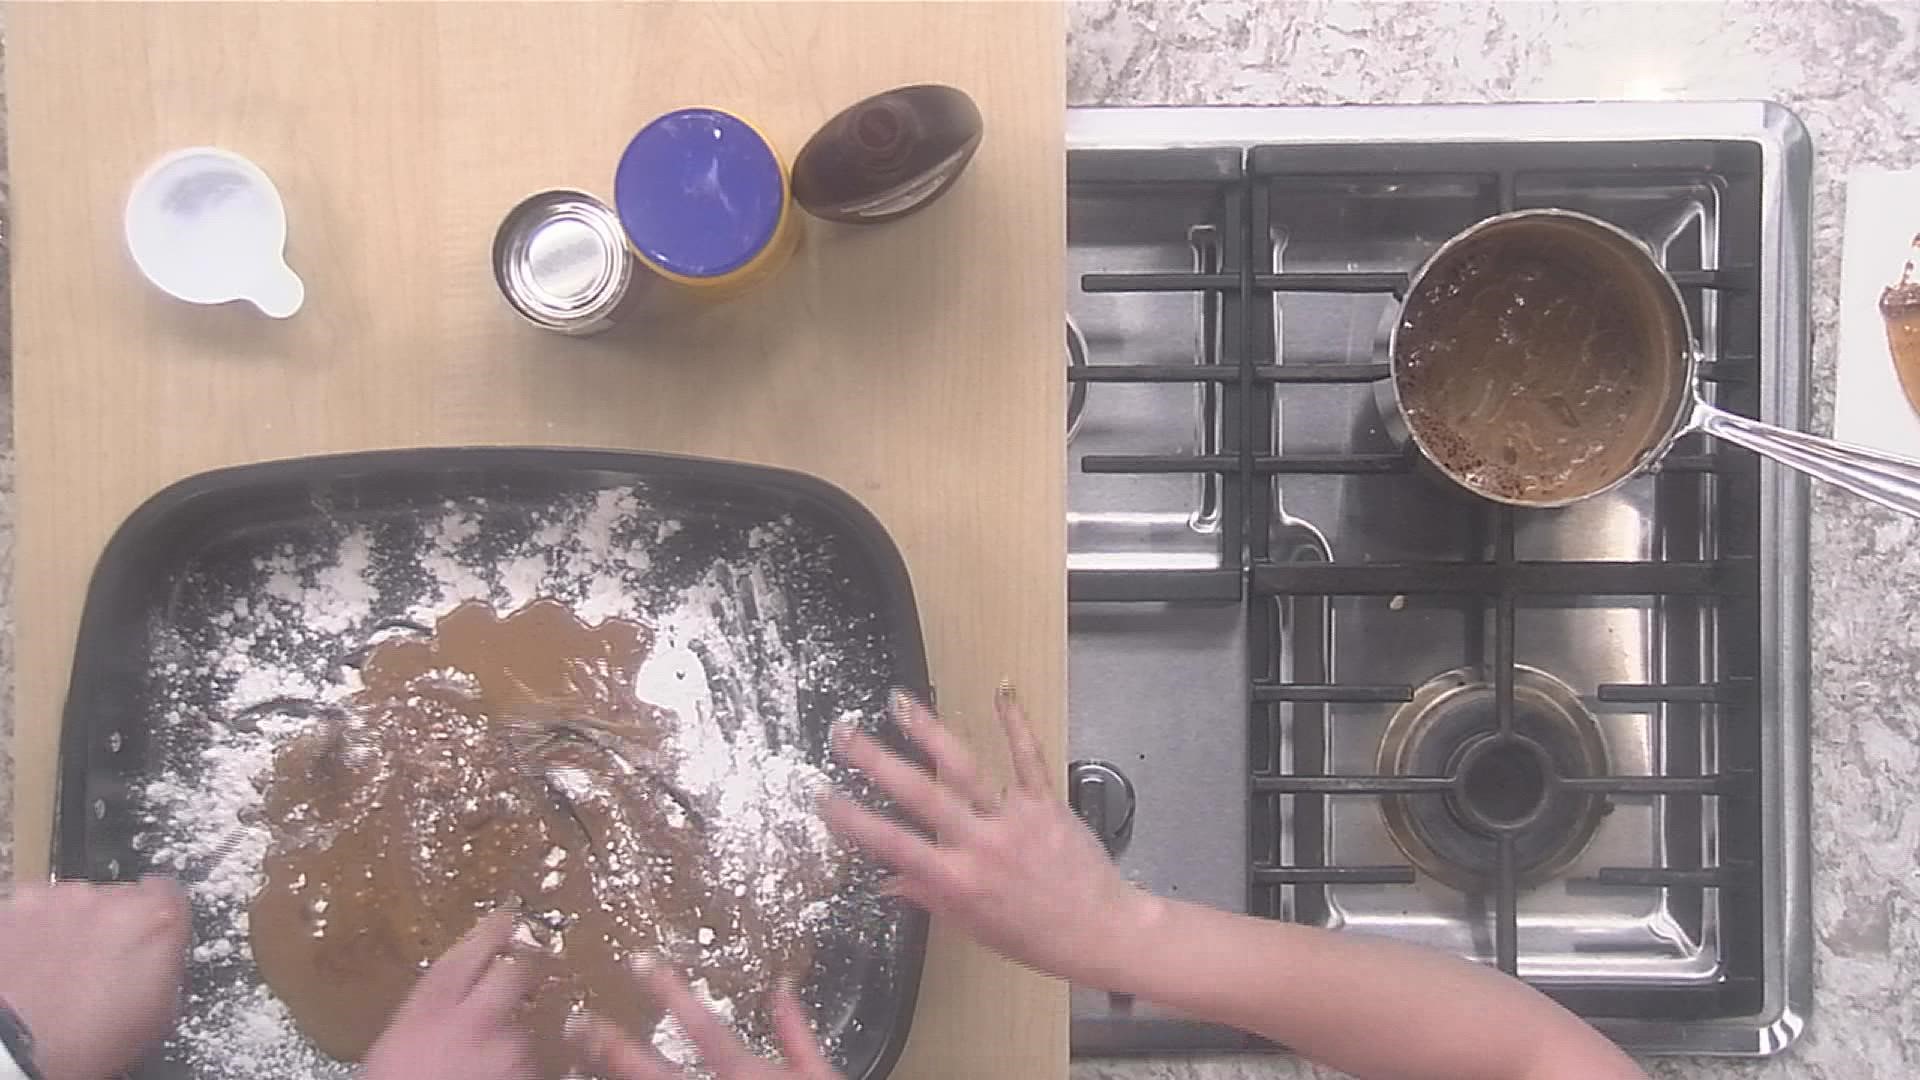 We've all made slime with glue and other gunk, but how do you make it so you can eat it?